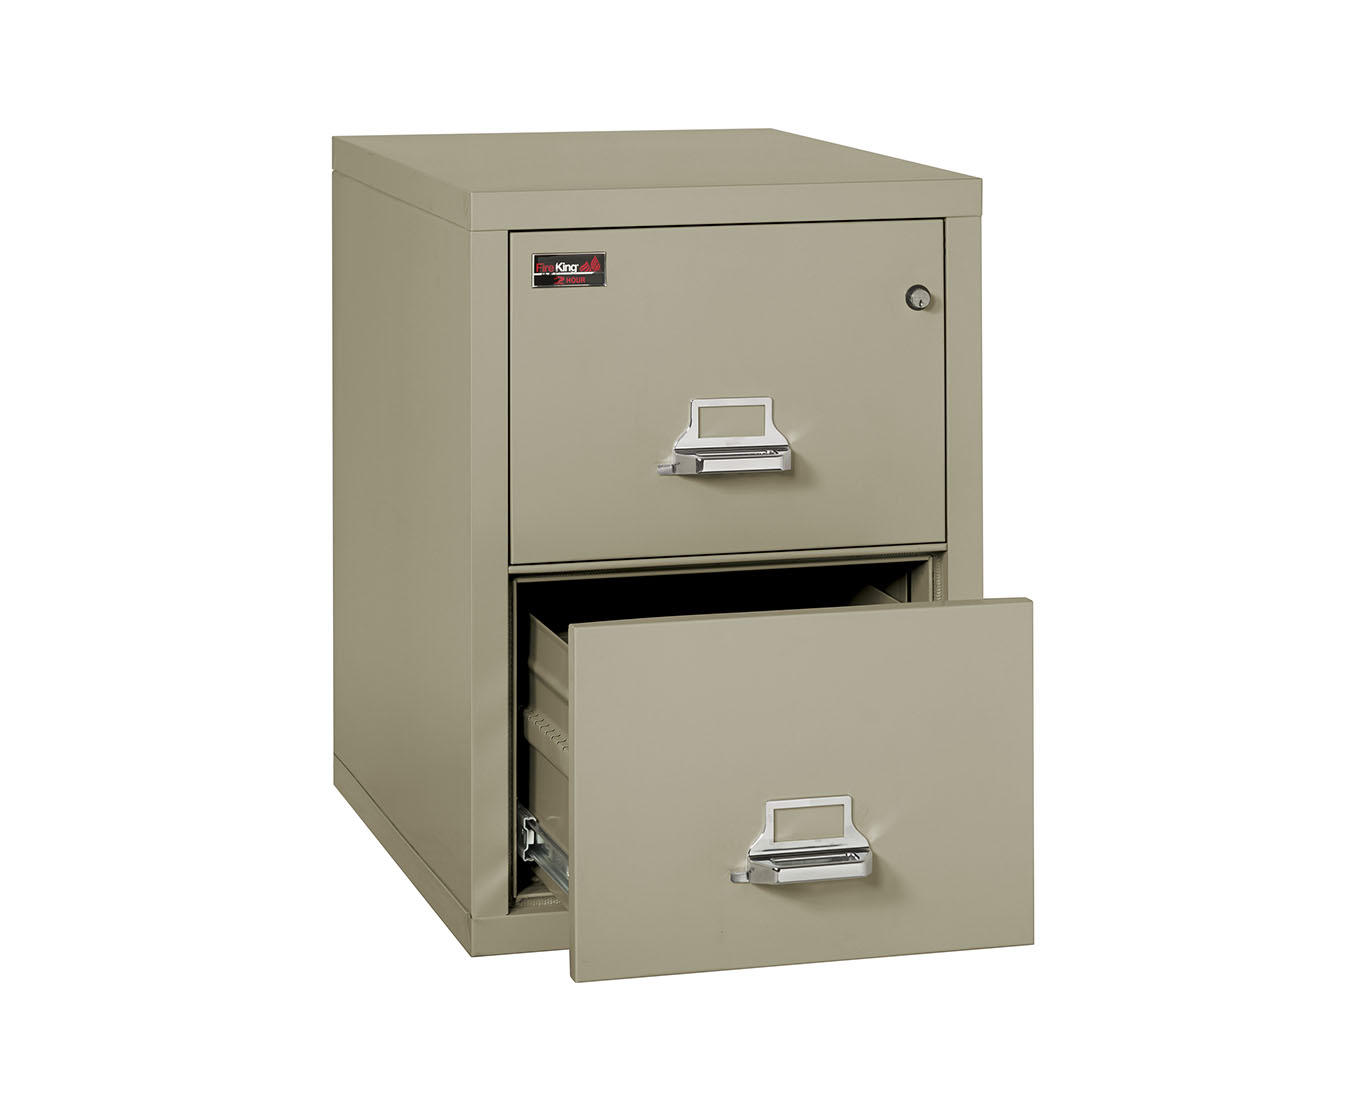 Fireproof File Cabinets 2 Hour Rated Fireking within dimensions 1366 X 1110